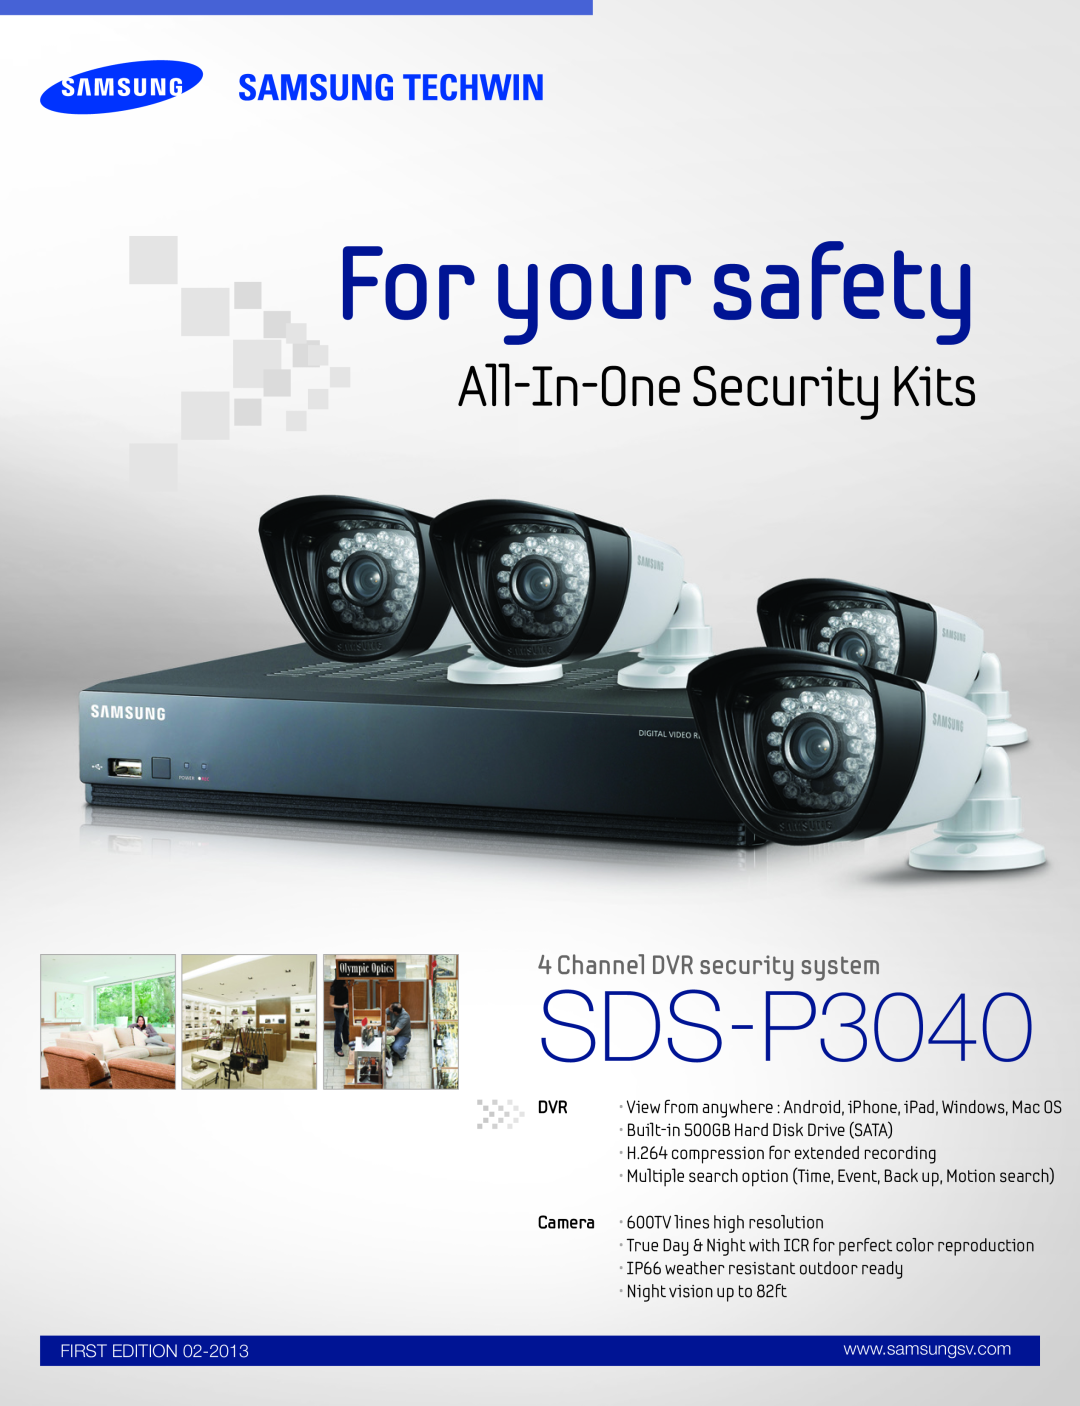 Samsung SDR3100, SDSV3040 manual Channel DVR security system, For your safety, SDS-P3040, All-In-OneSecurity Kits, Camera 